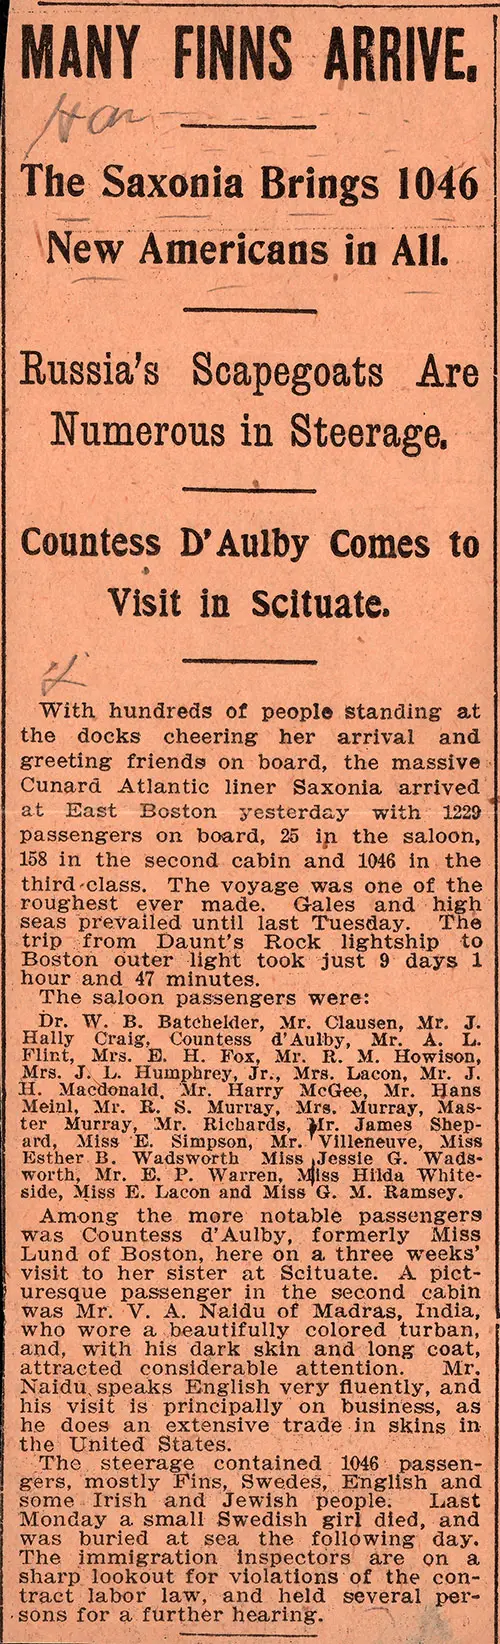 Reporting of Passengers on RMS Saxonia, 8 March 1903.